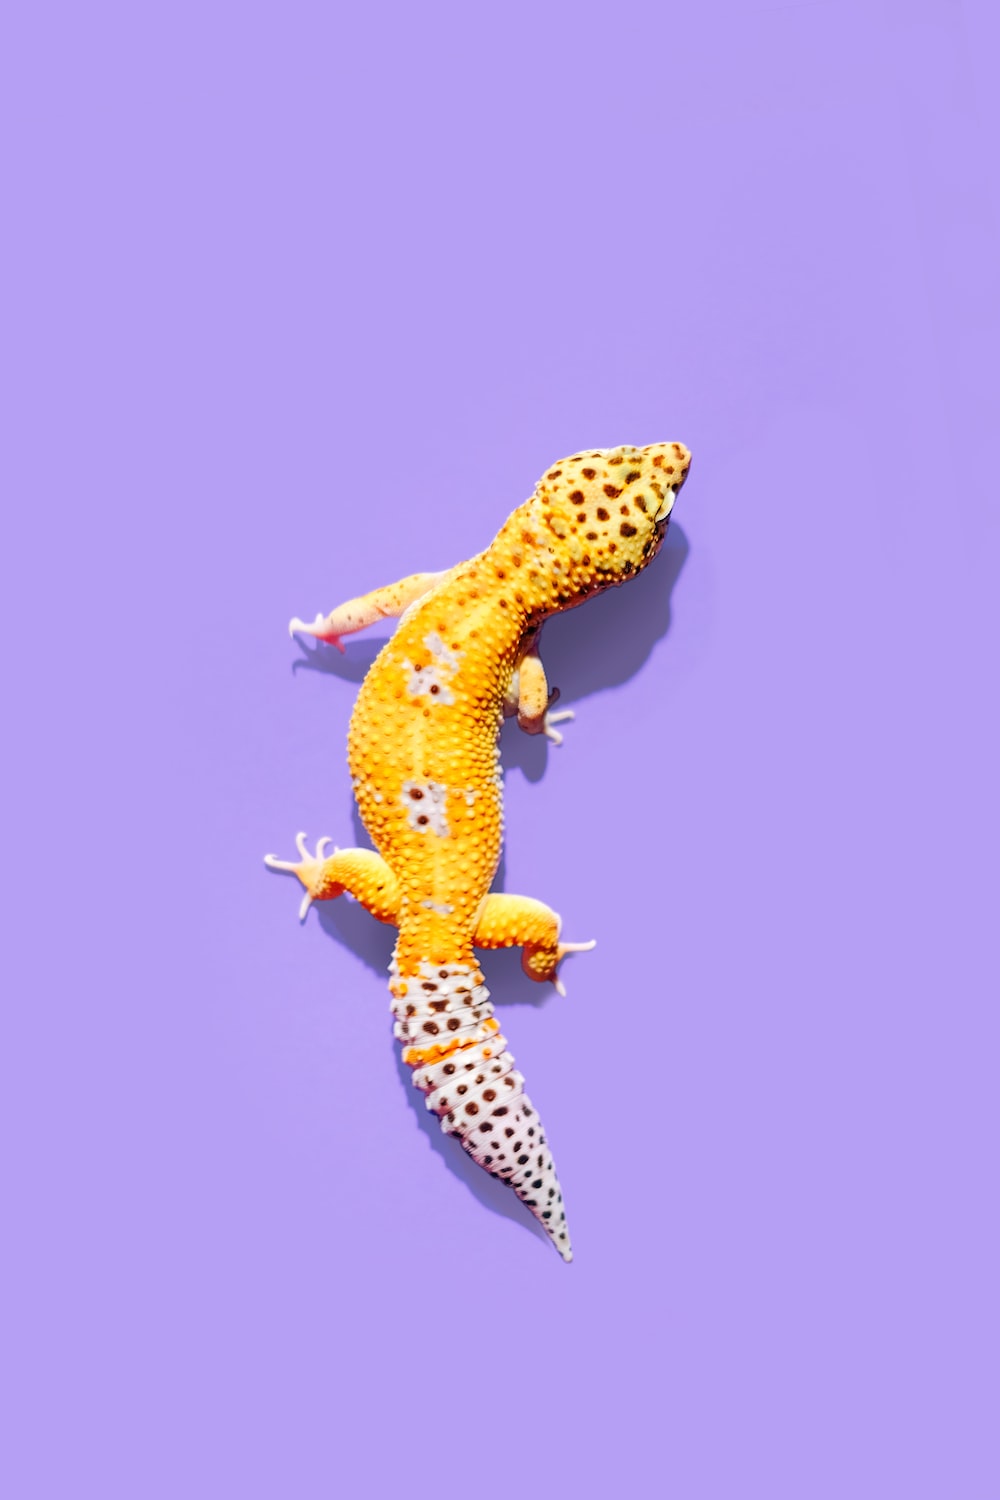 Leopard Gecko Picture. Download Free Image